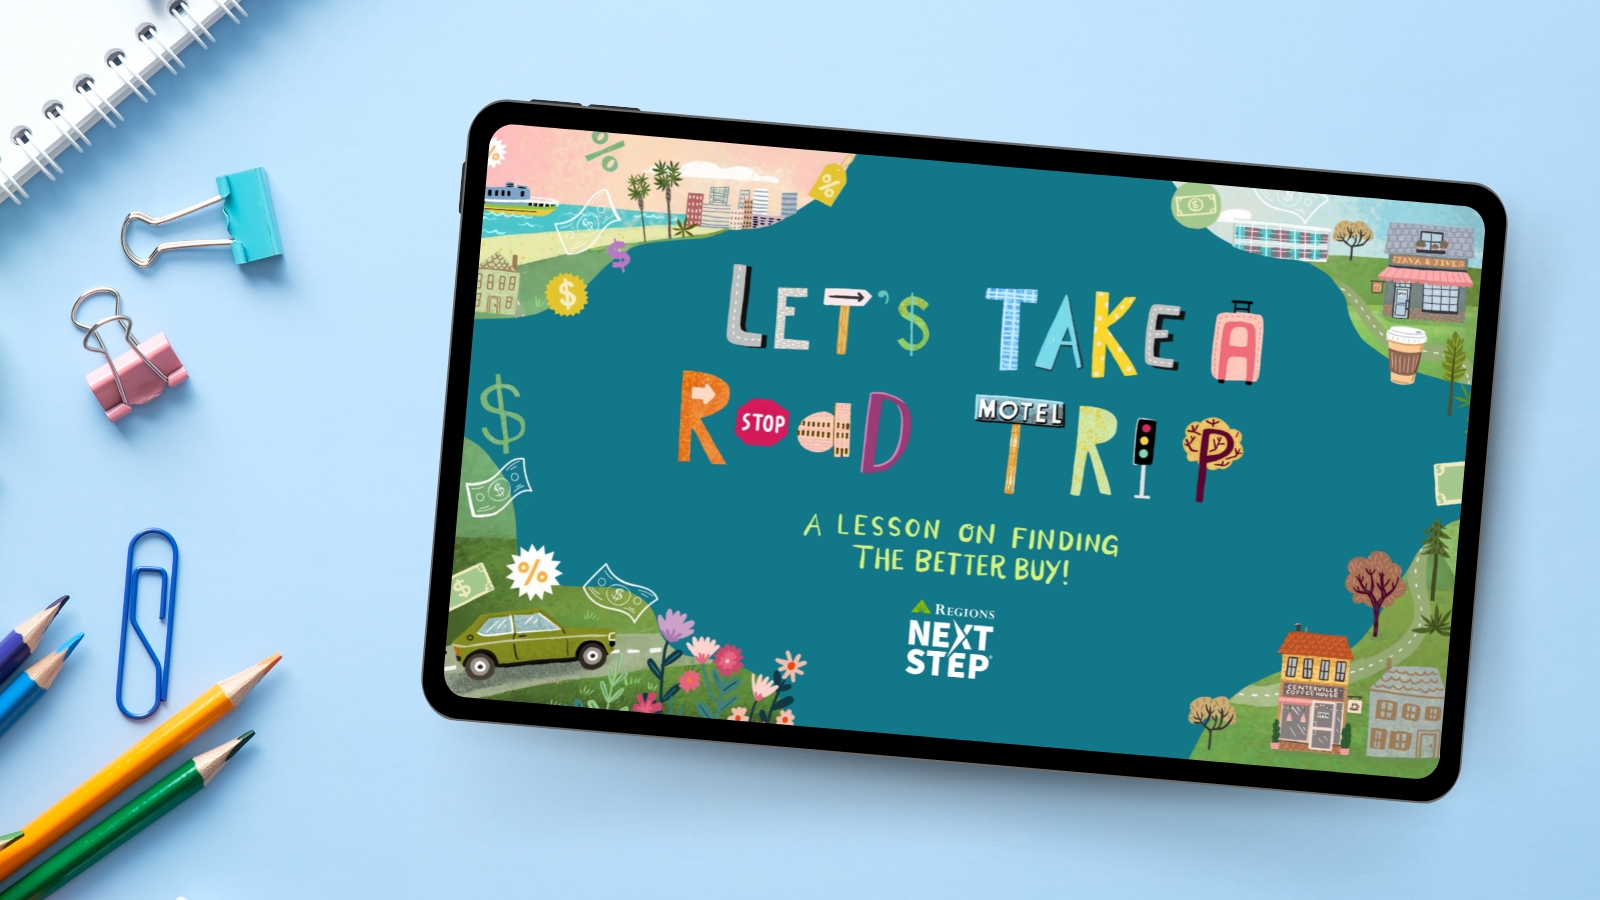 Let's Take a Road Trip! lesson on a tablet